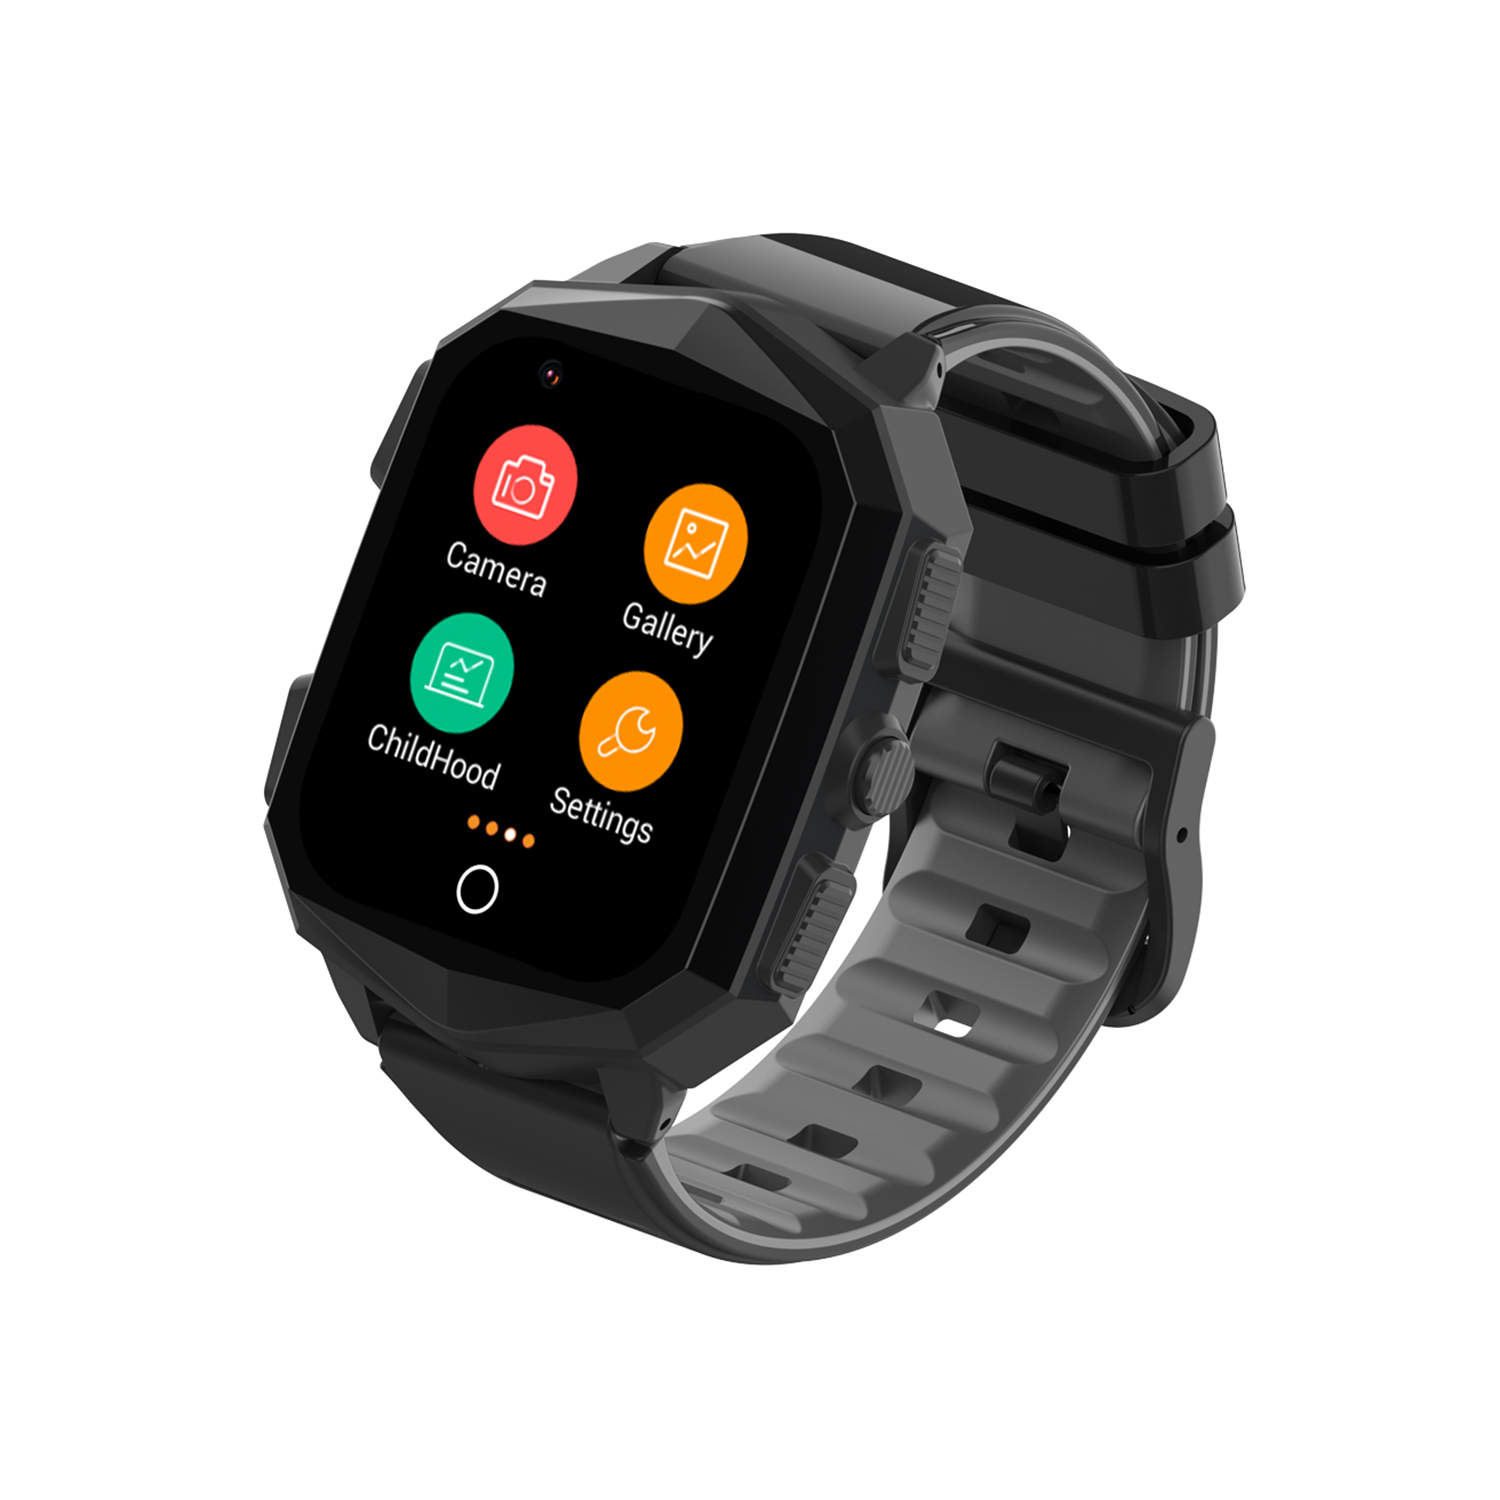 4G LTE IP67 waterproof Colorful Touch Screen Kids GPS Smart watch with History Tracking Free Global Video Call for students School boys Girls Y49